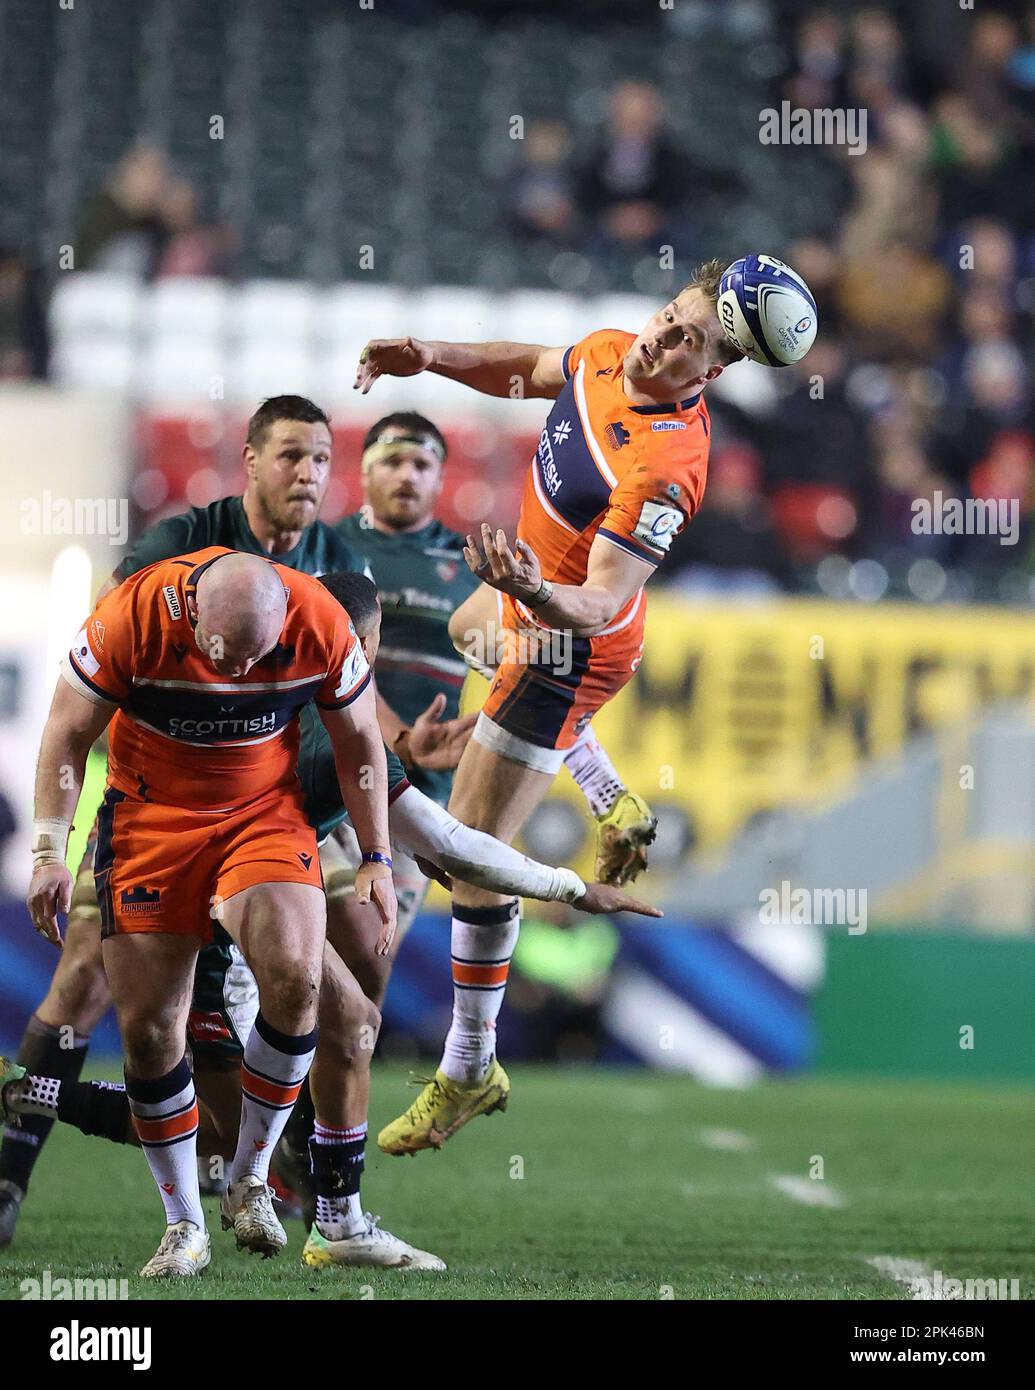 31.03.2022   Leicester, England. Rugby Union.                   EdinburghÕs Duhan van der Merwe fails to catch a high ball during the Heineken Champions Cup quarter final match played between Leicester Tigers and Edinburgh Rugby at the Mattioli Woods Welford Road Stadium, Leicester.  © Phil Hutchinson Stock Photo